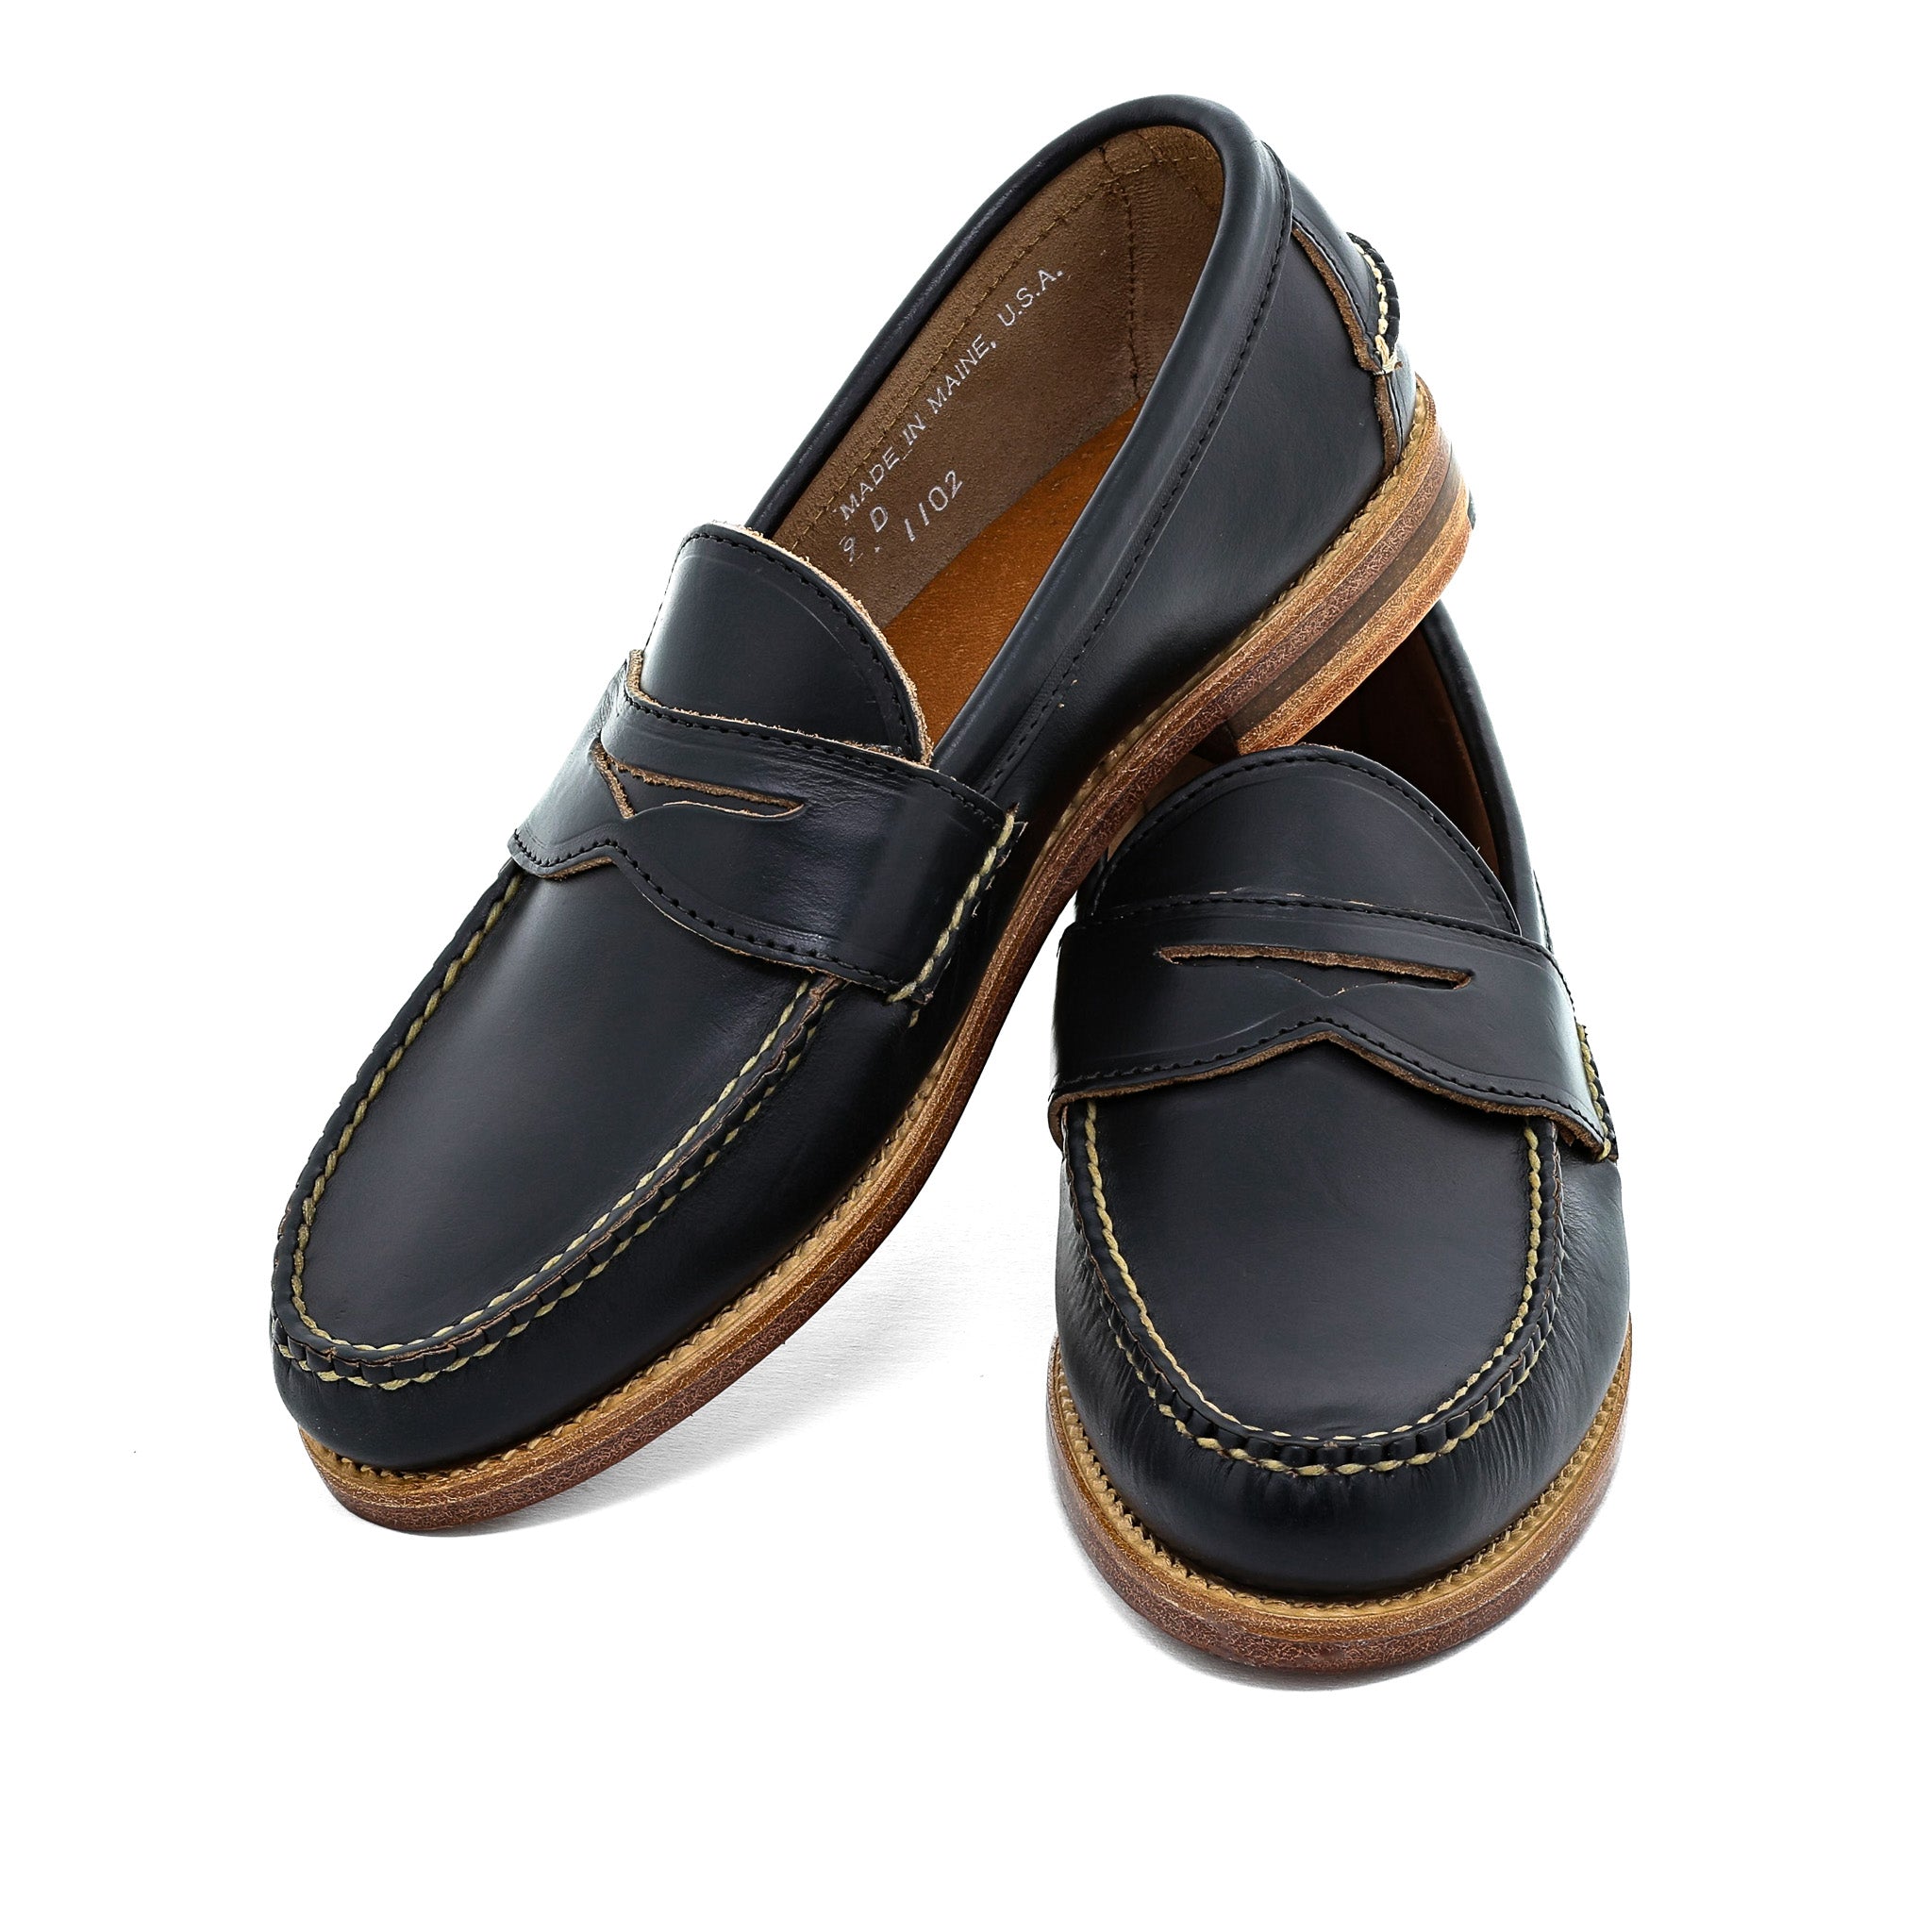 Pinch Penny Loafers - Black Chromexcel, Rancourt & Co.